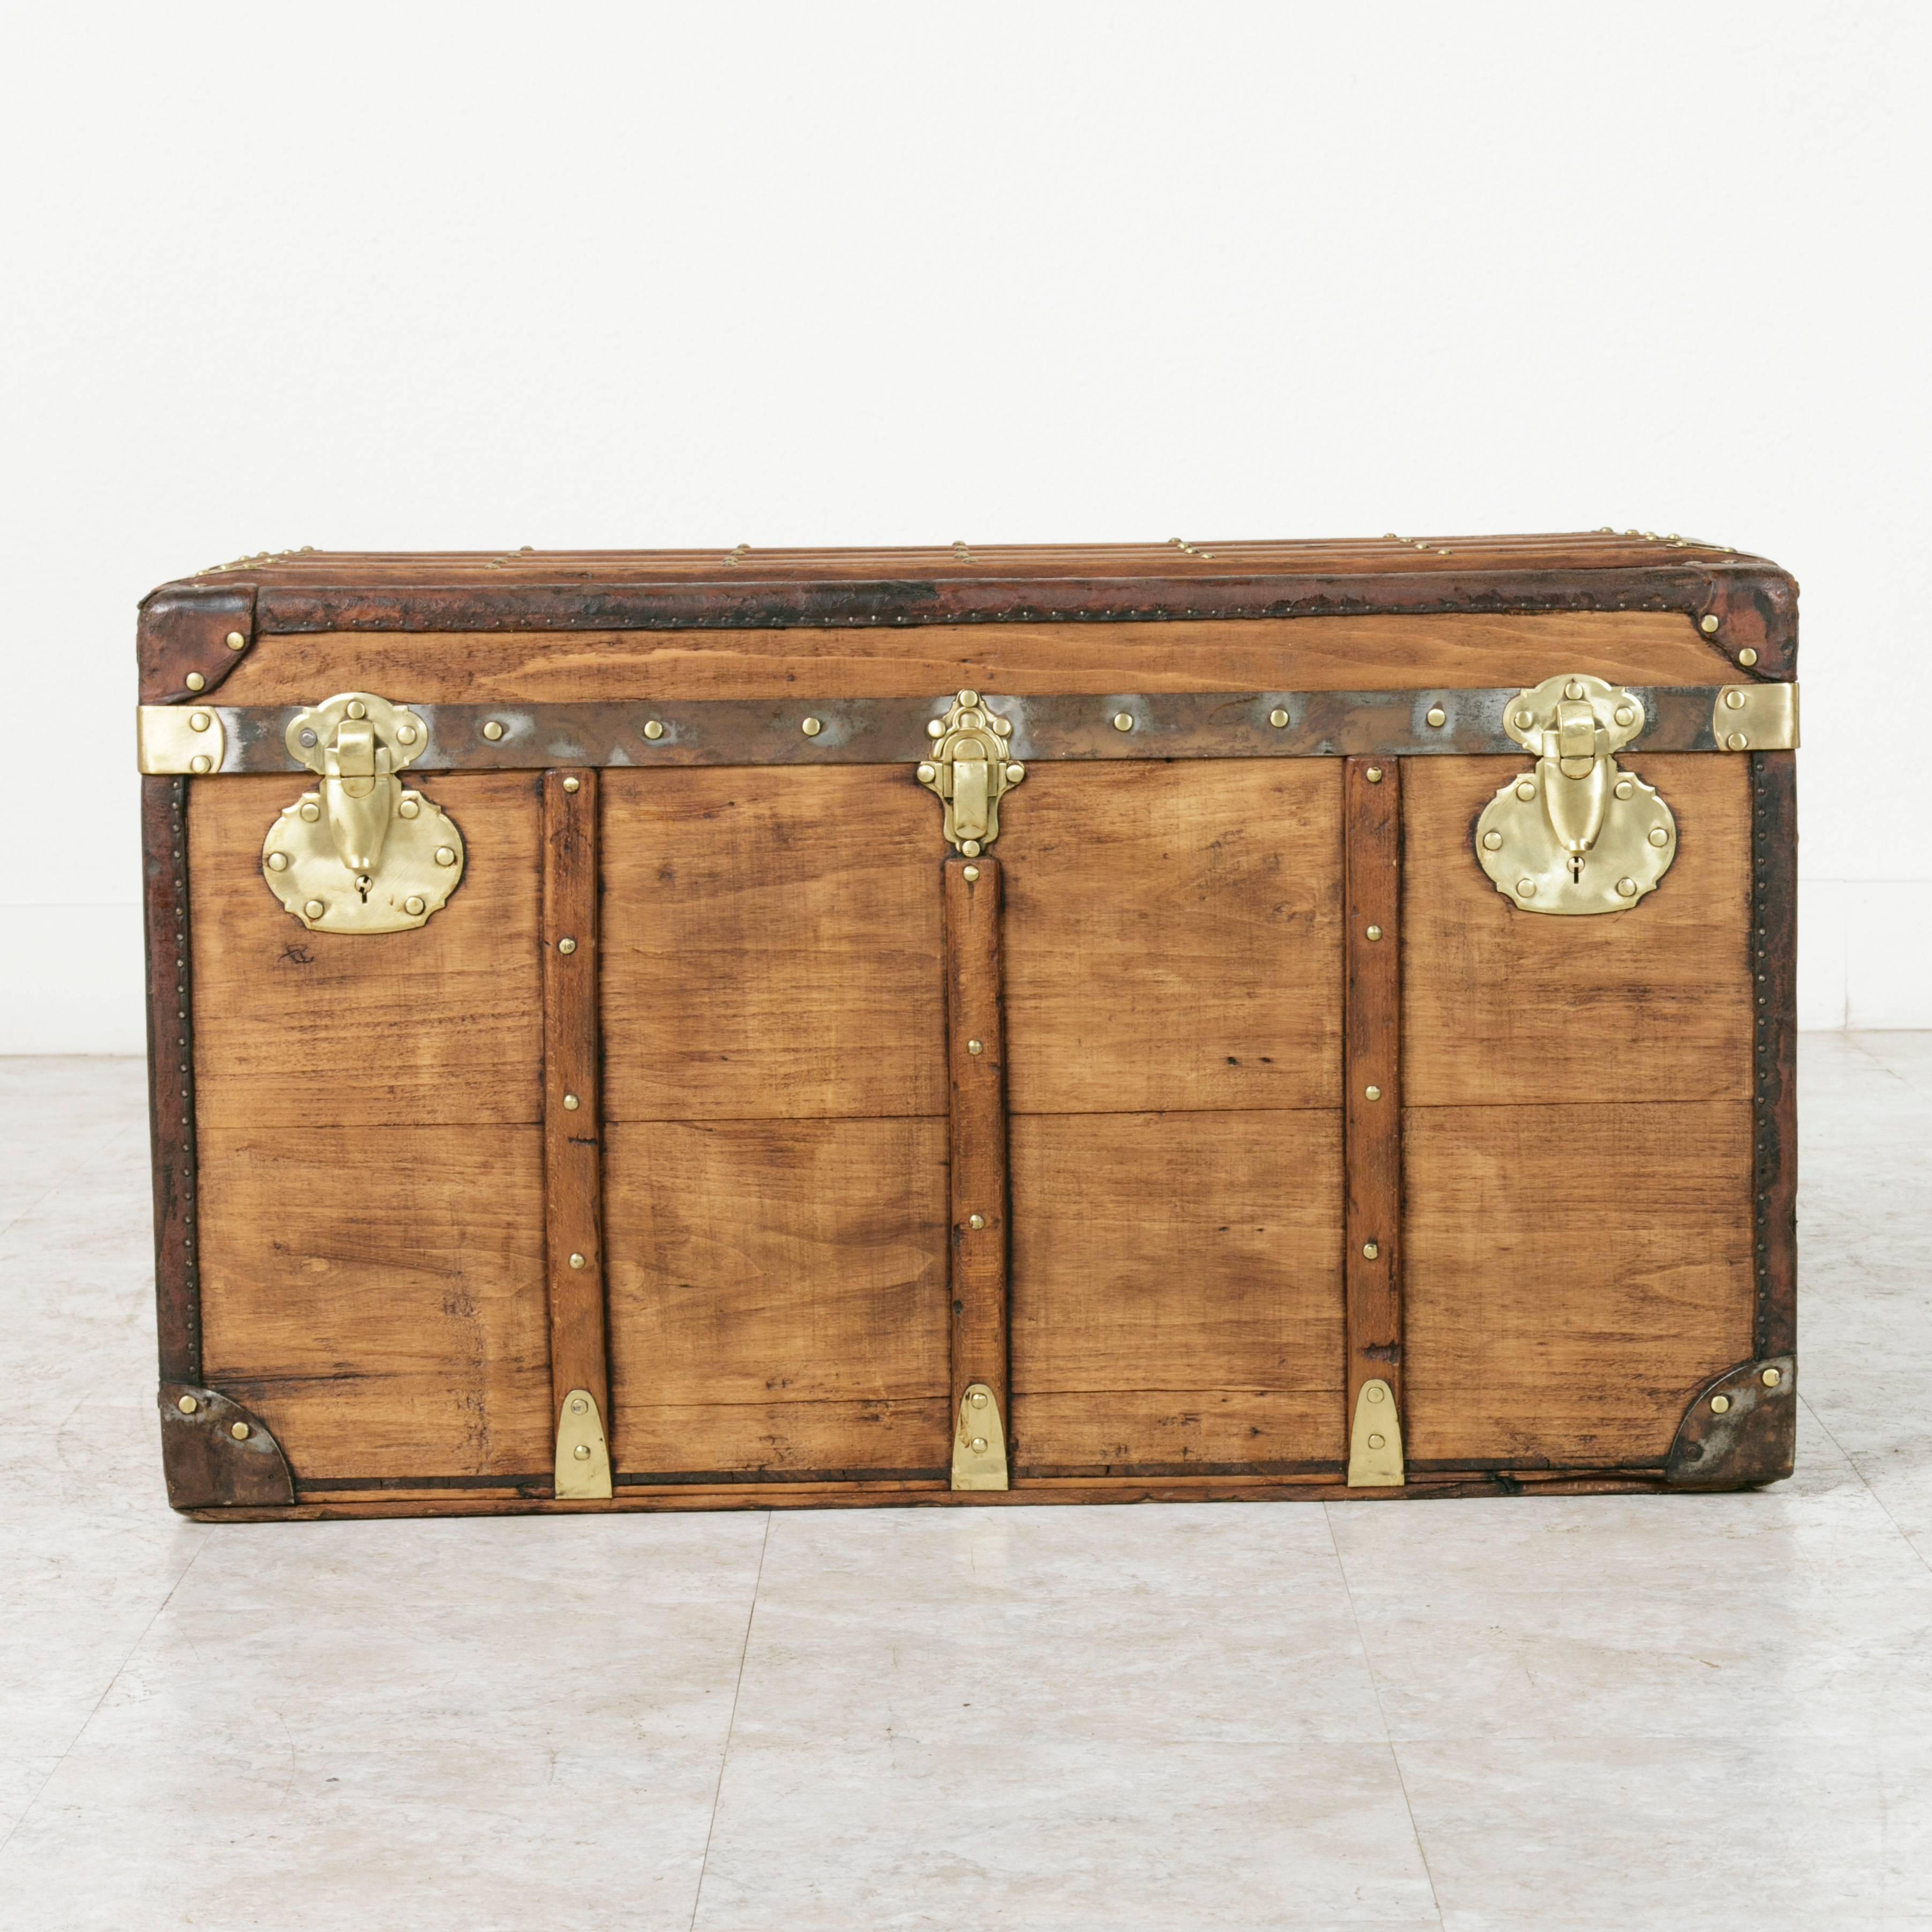 This early 20th century steam trunk features many sought after details. Its flat top makes it an excellent choice for use as a coffee table or side table, and its polished brass and iron trimmings give it a flash of luxury. This piece is made of